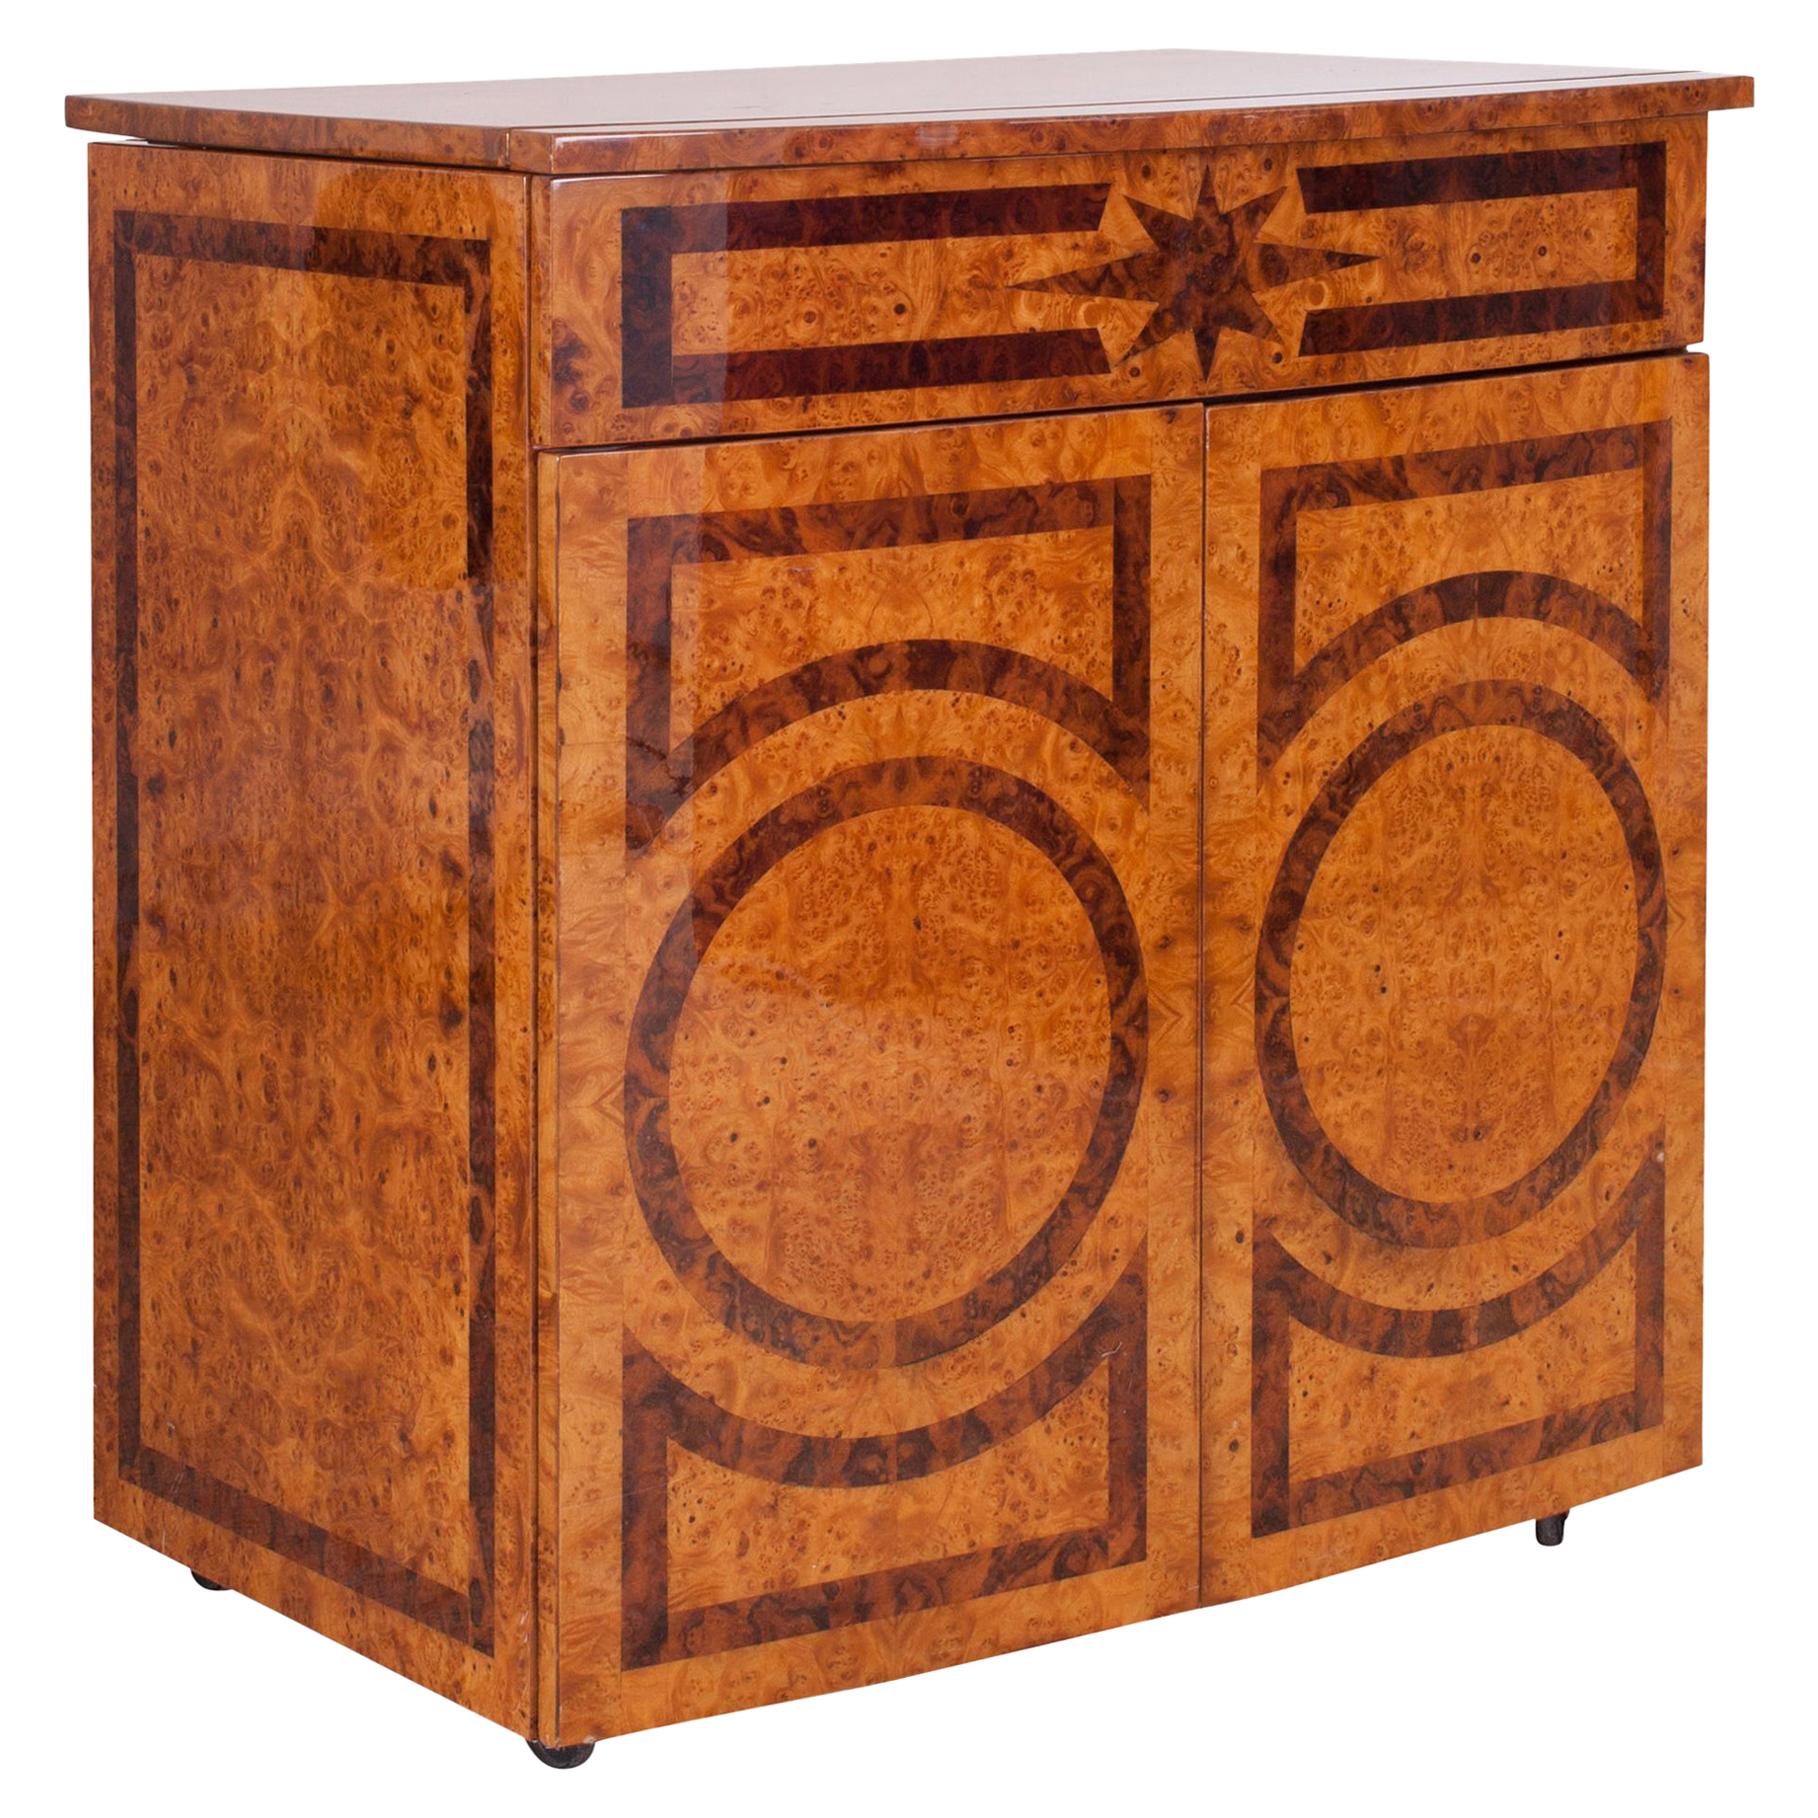 Hollywood Regency Lacquered Dry Bar Cabinet with Burl Inlay